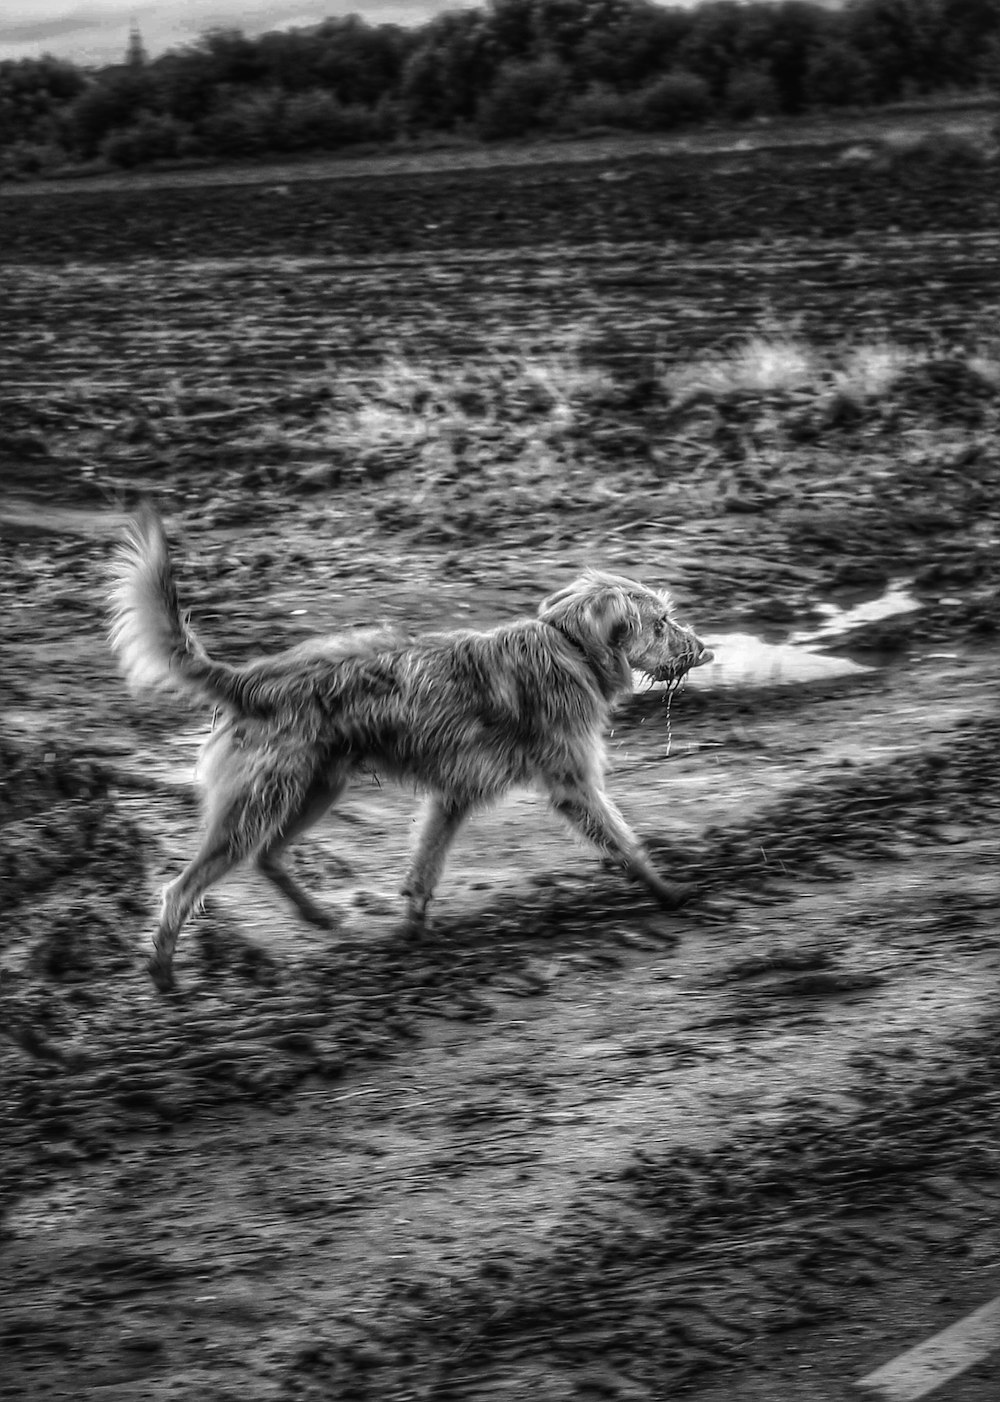 a dog running in a field